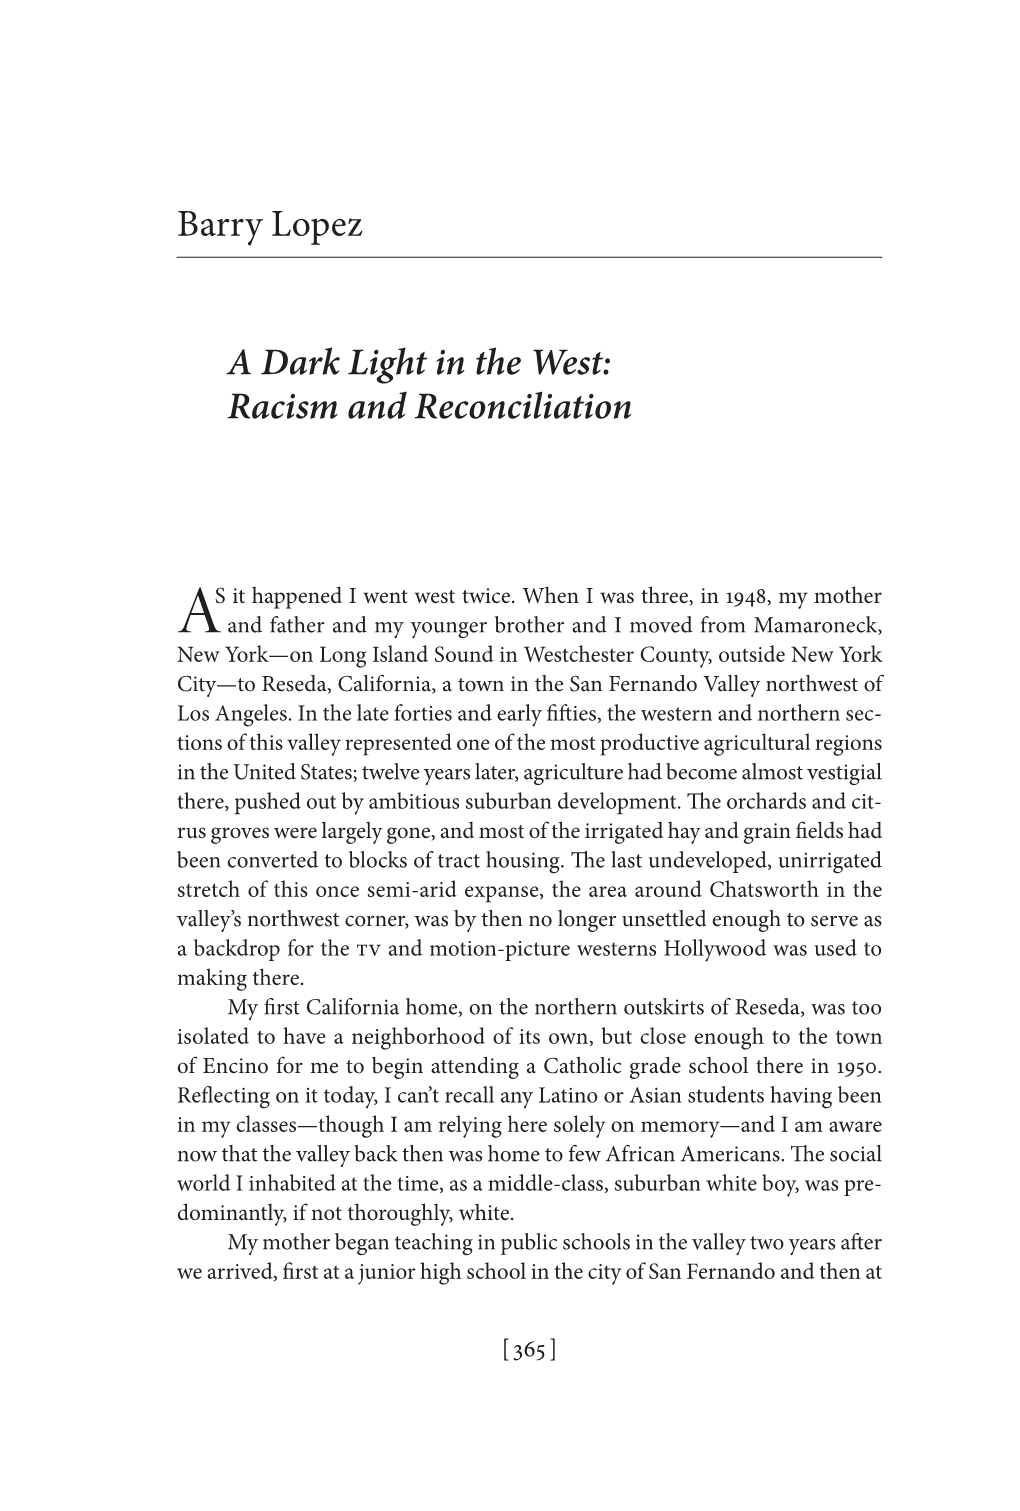 Barry Lopez a Dark Light in the West: Racism and Reconciliation